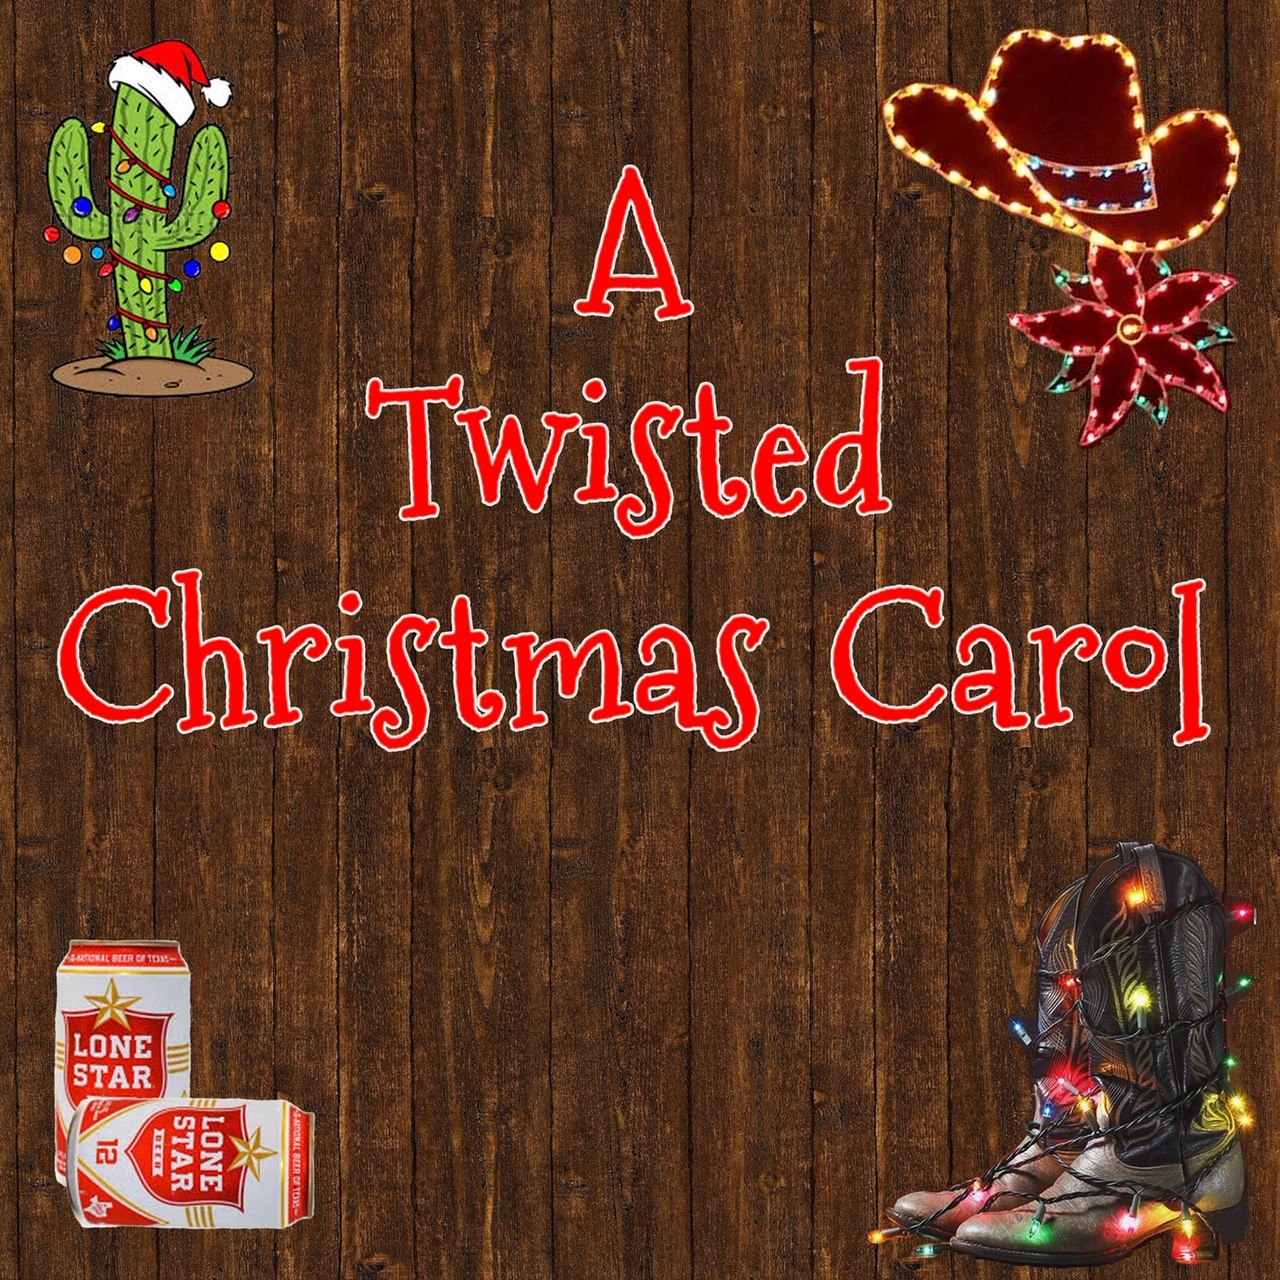 A Twisted Christmas Carol – A Sneak Peek Staged Reading of a New Play by Award-Winning Playwright Phil Olson